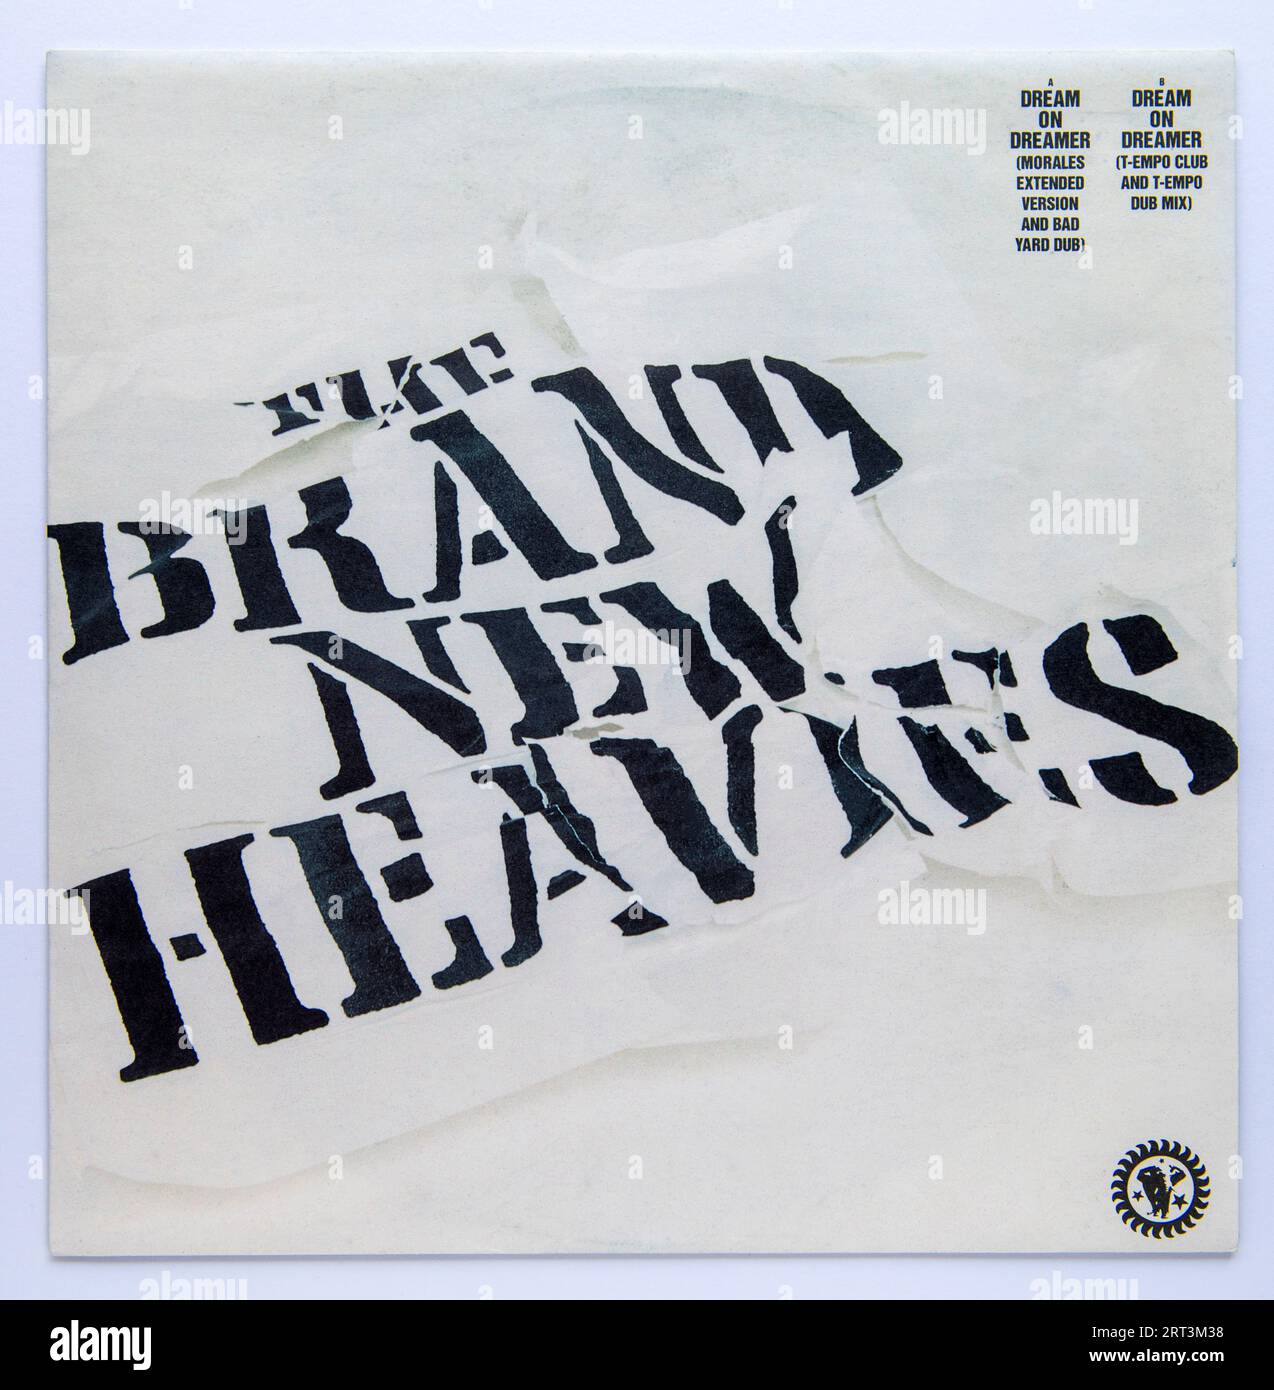 Picture cover of the 12 inch single version of Dream On Dreamer by The Brand New Heavies, which was released in 1994 Stock Photo